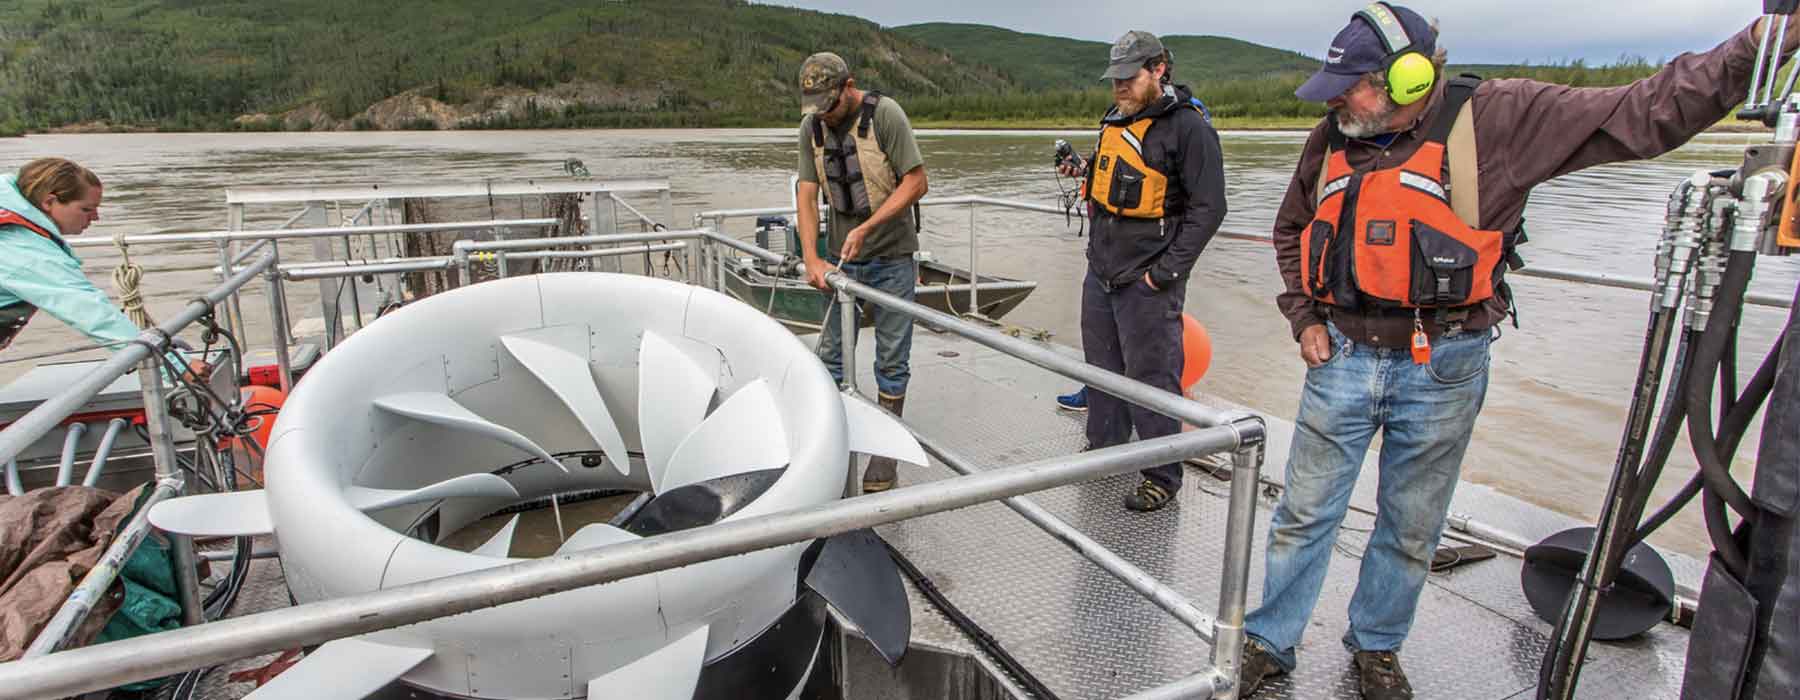 Parker Bradley, a biologist with the Alaska Department of Fish and Game, sets up a net housed under a turbine placed in the Tanana River near Nenana. The work is part of research being carried out by UAF's Alaska Center for Energy and Power (ACEP) to determine the feasibility of hyrokinetic generators being used to help offset the high cost of energy throughout rural Alaska. At far left is UAF fisheries undergraduate student Stephanie Jump who spent the summer of 2015 interning with Fish and Game on the project. At right are ACEP researchers Jeremy Kasper and Jack Schmid.